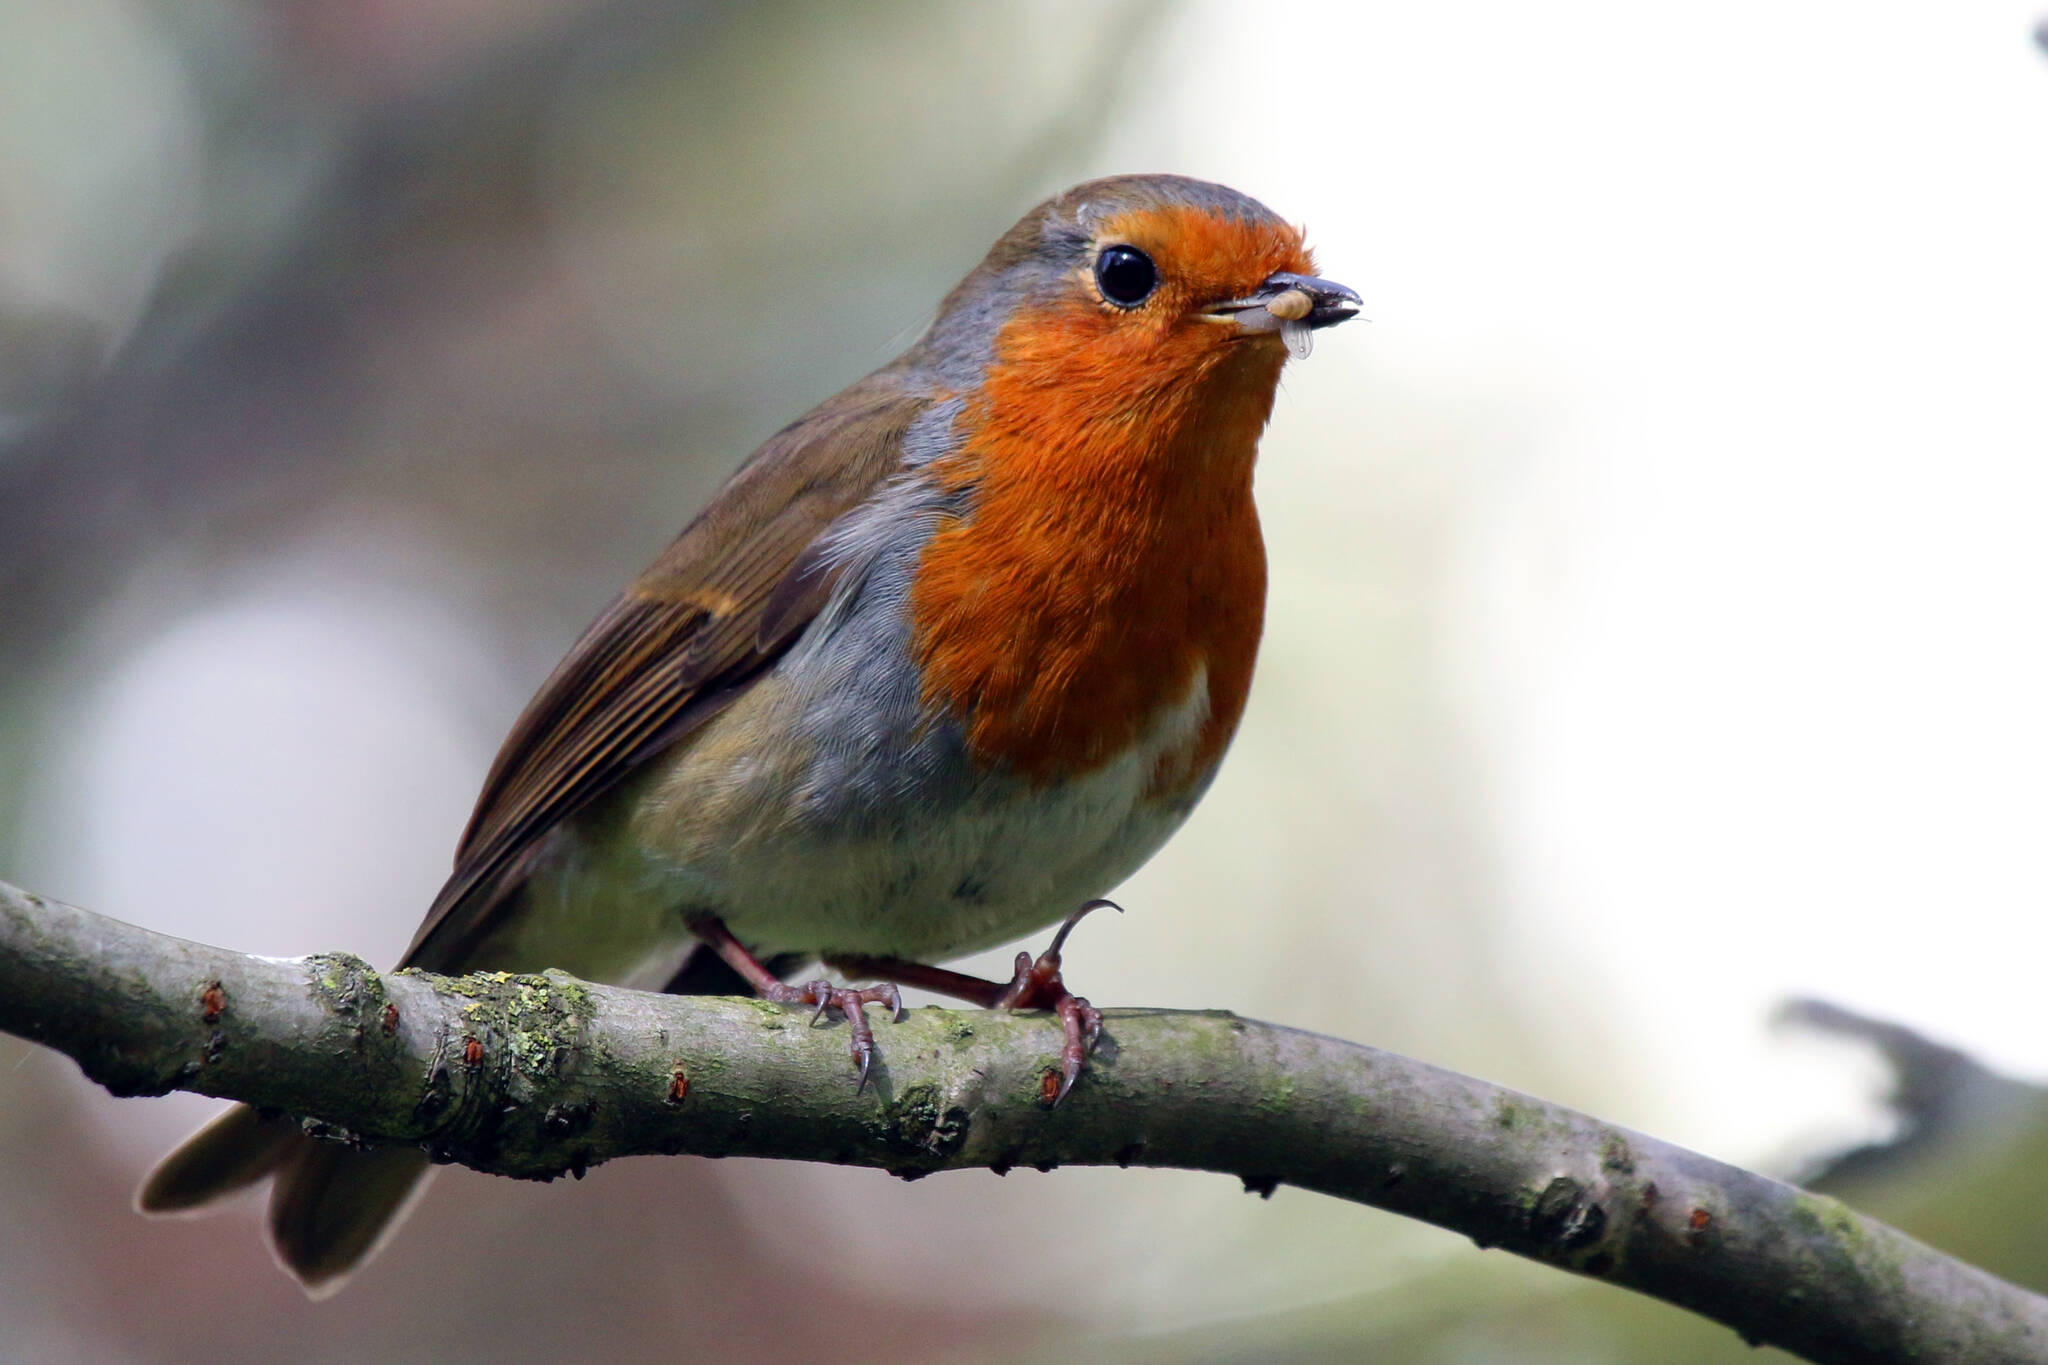 This photo, available under a Creative Commons license, shows a European robin. While its name is similar to that of the American robin, they are not closely related. (Courtesy Photo / Charles J. Sharp)